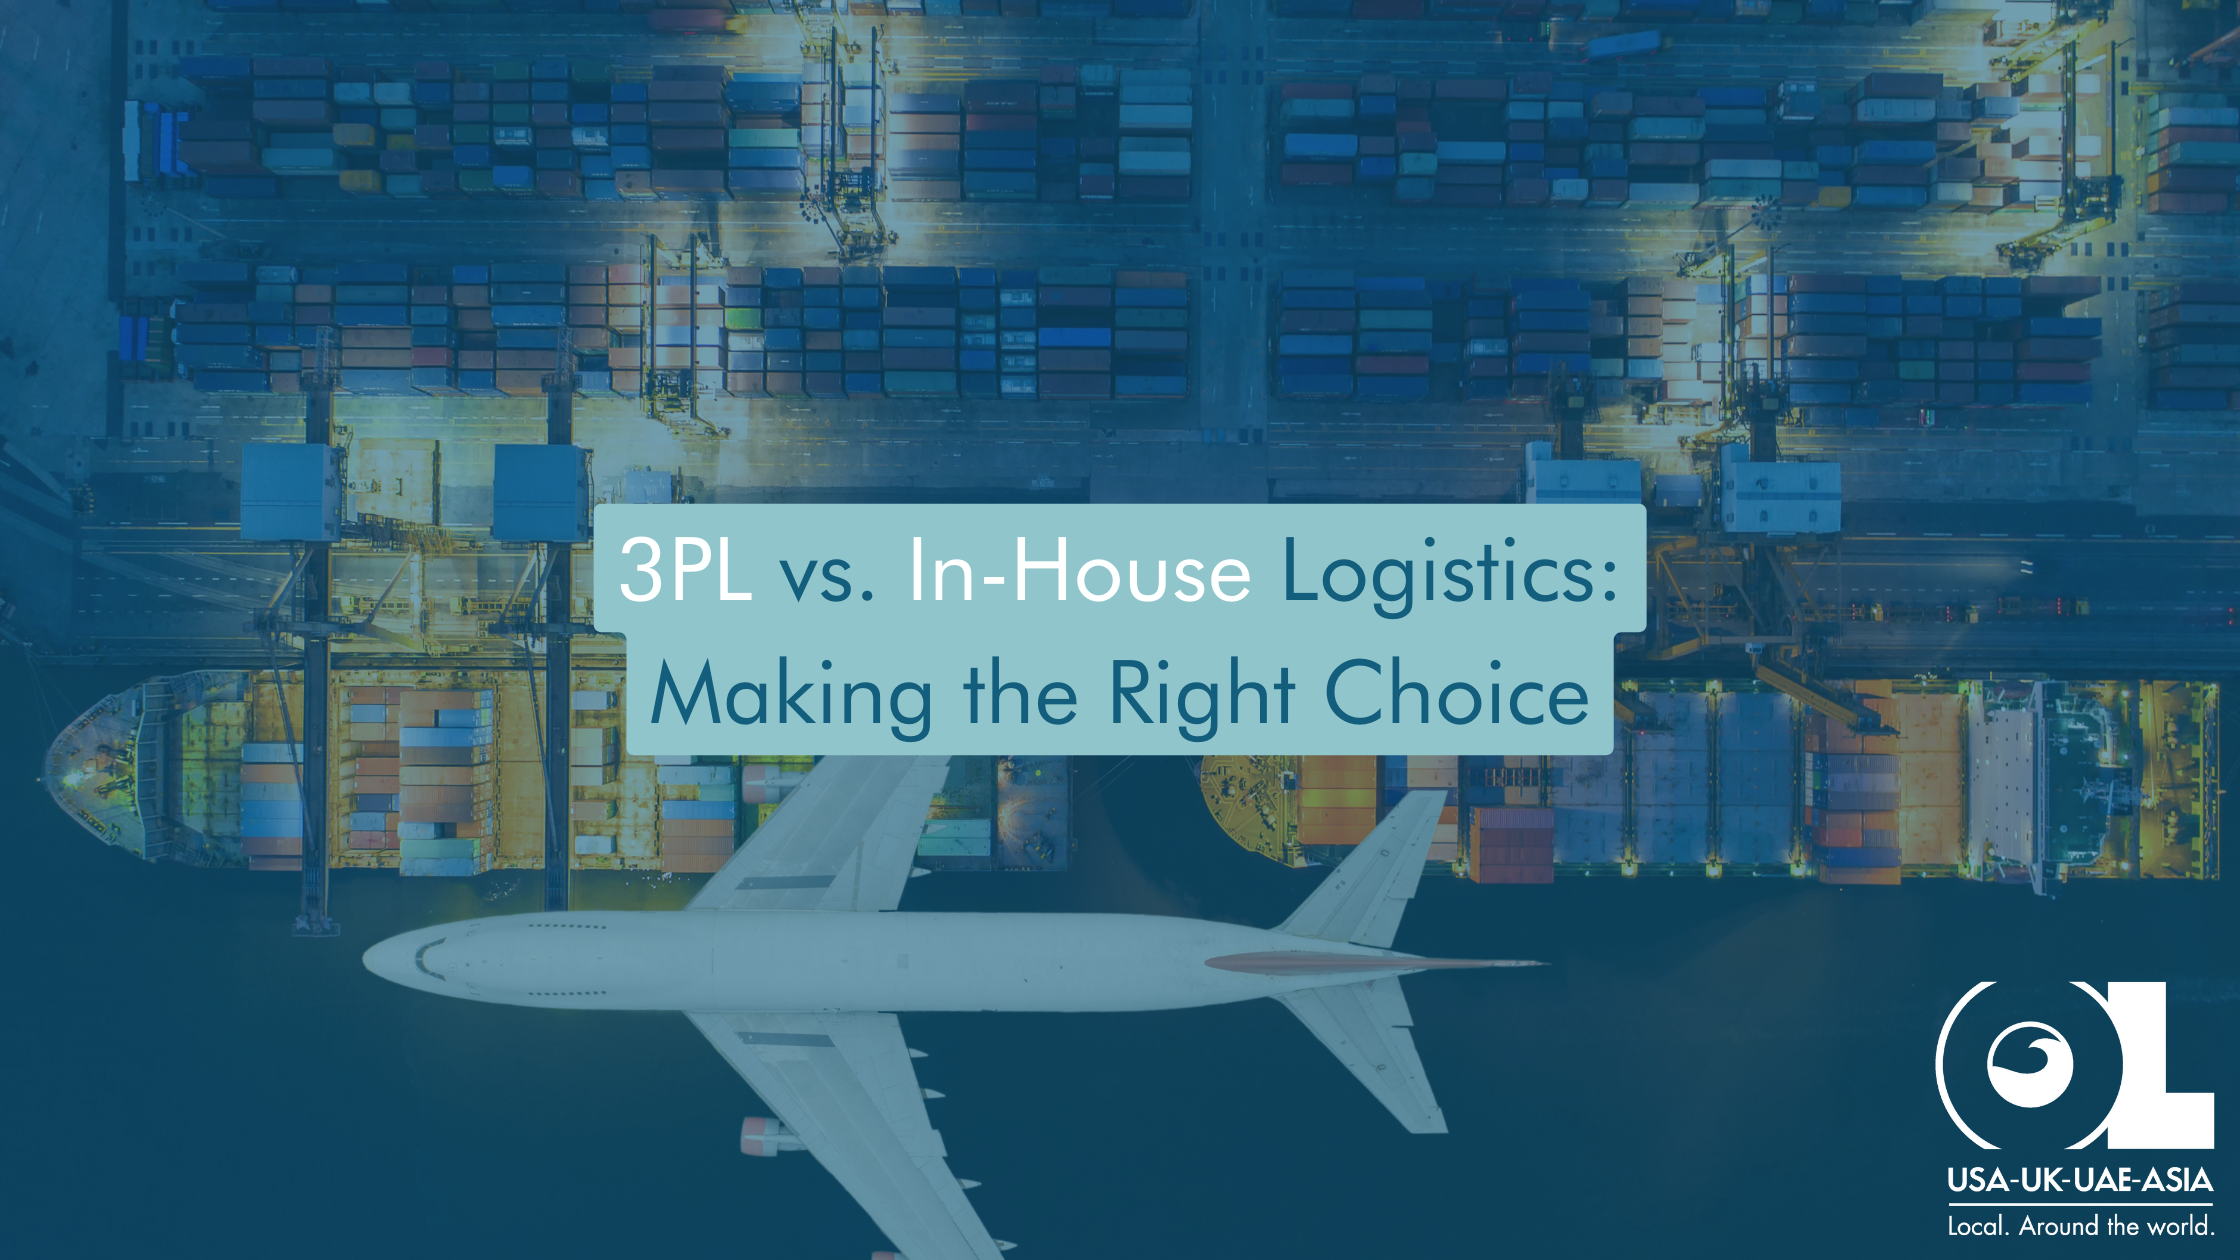 3PL-vs.-In-House-Logistics-Making-the-Right-Choice-OL-USA